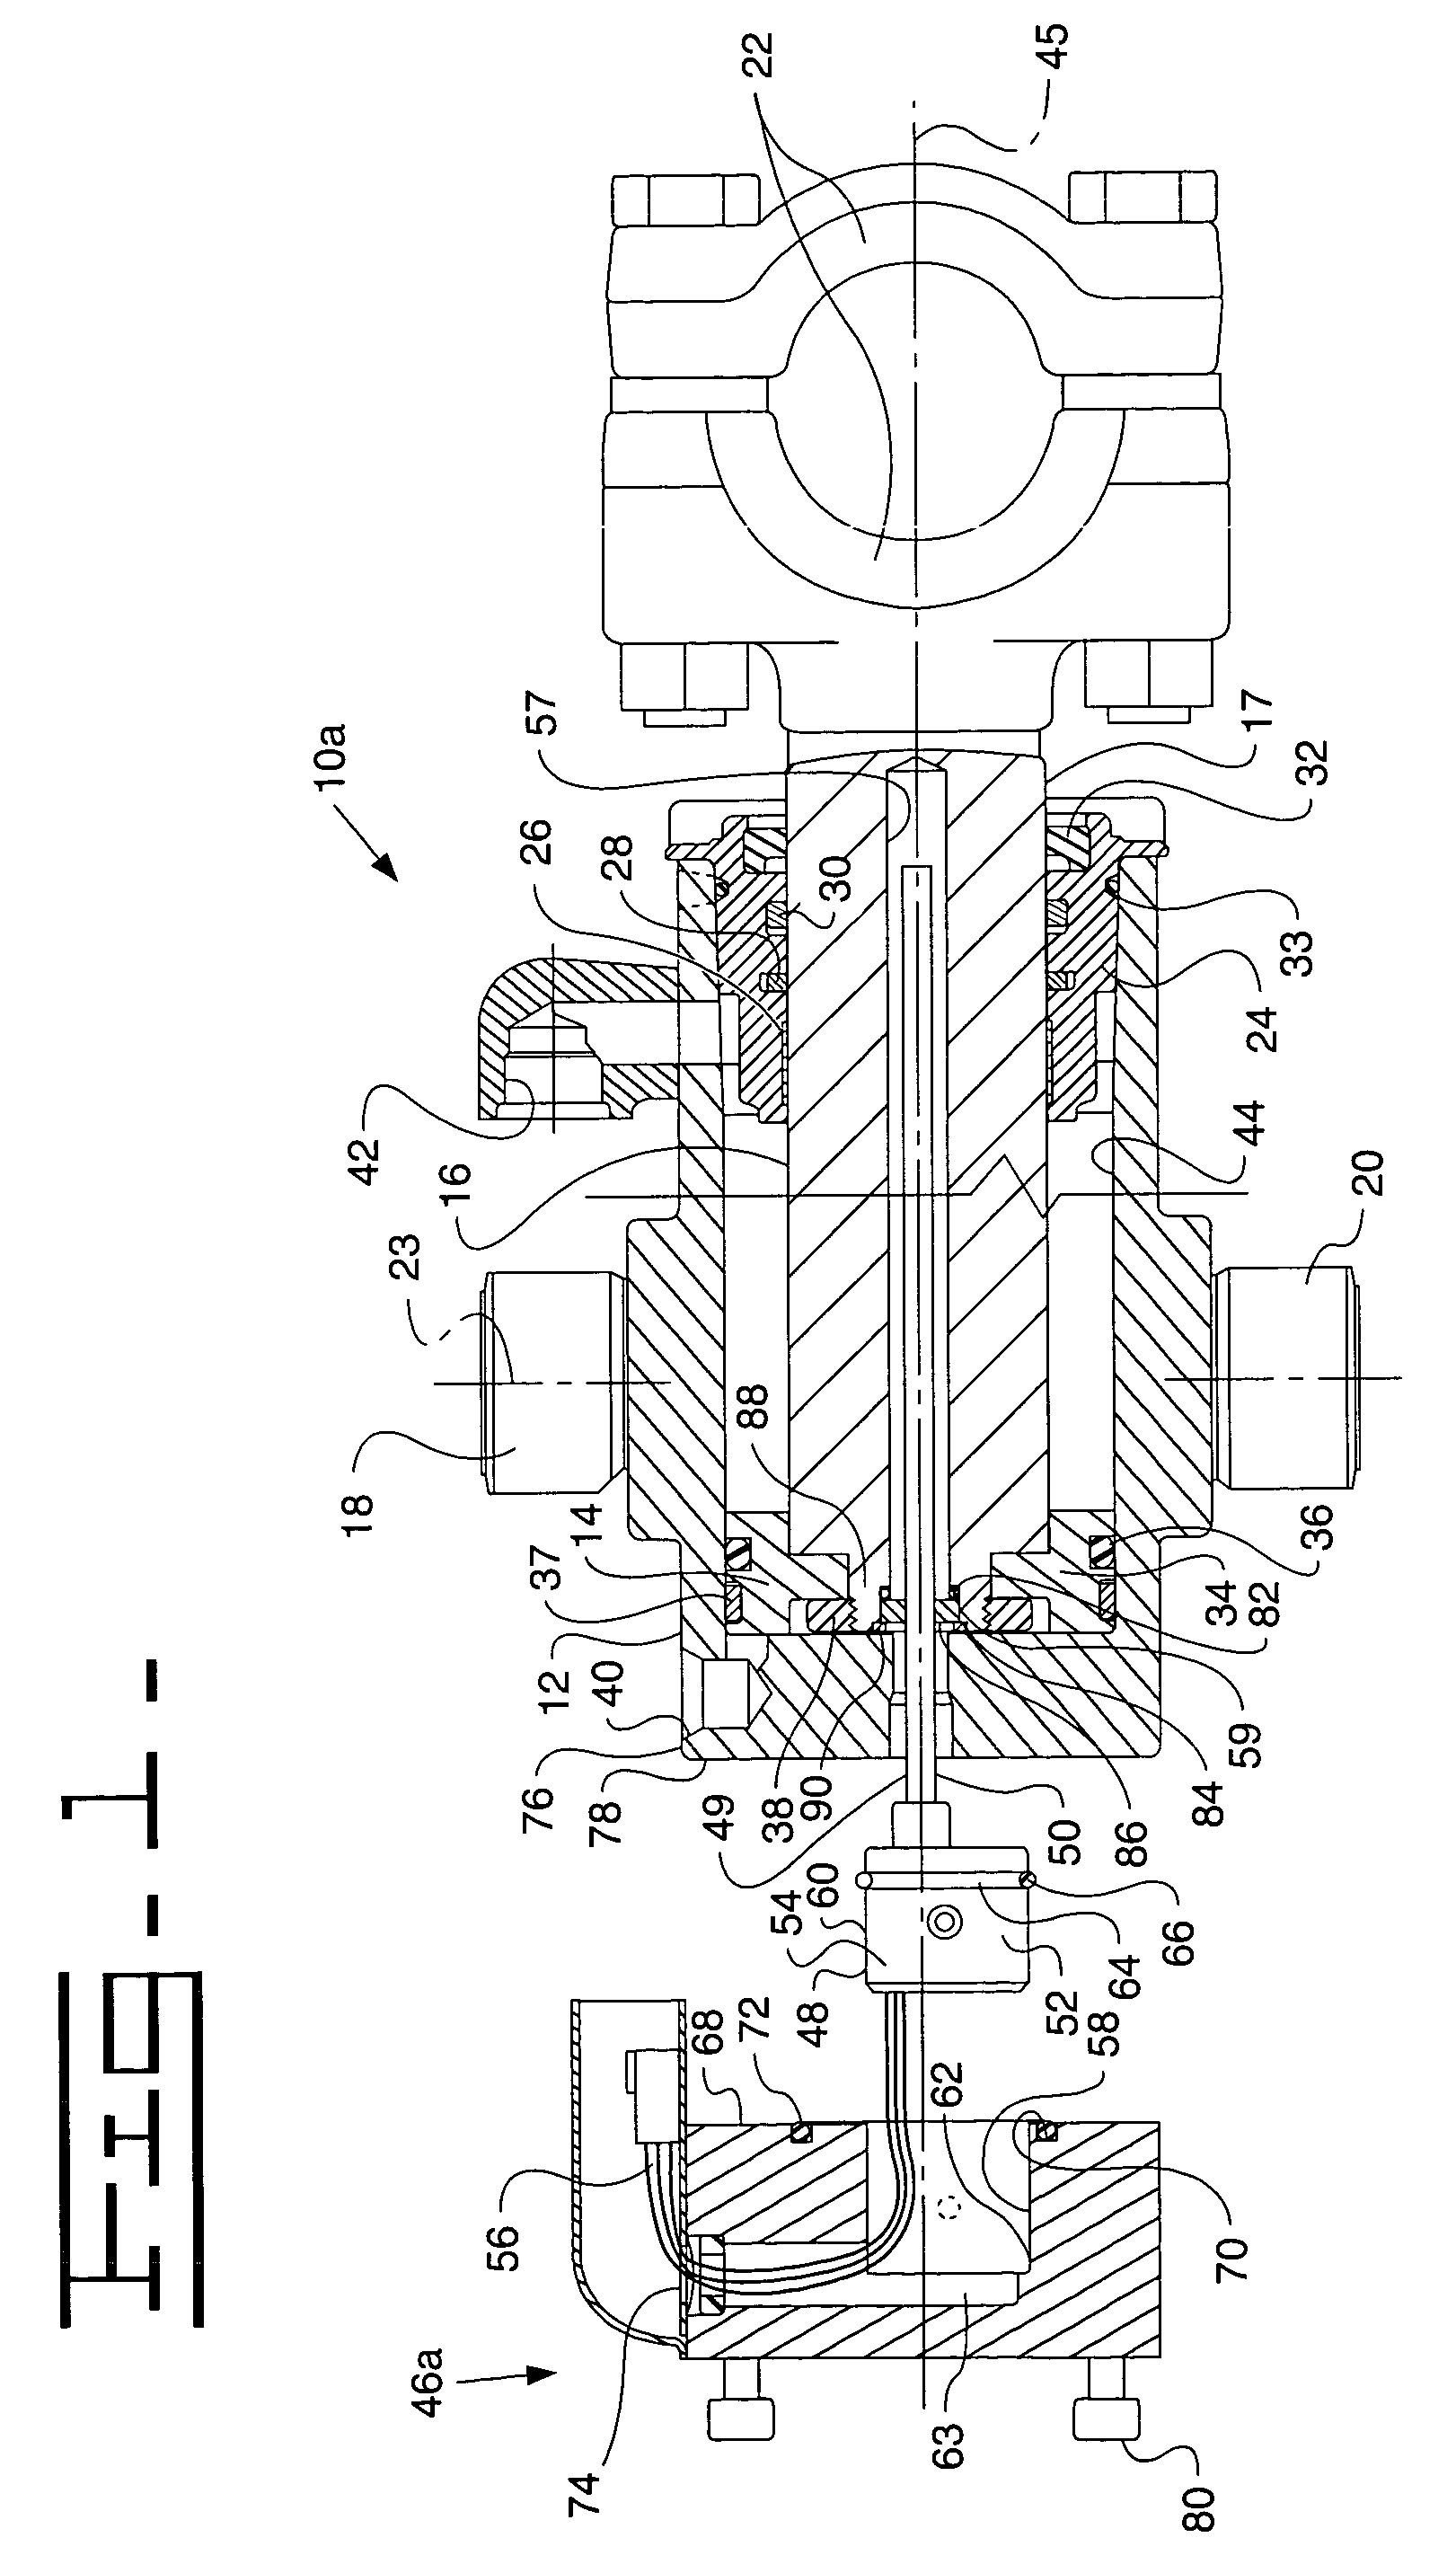 Position sensing cylinder cap for ease of service and assembly